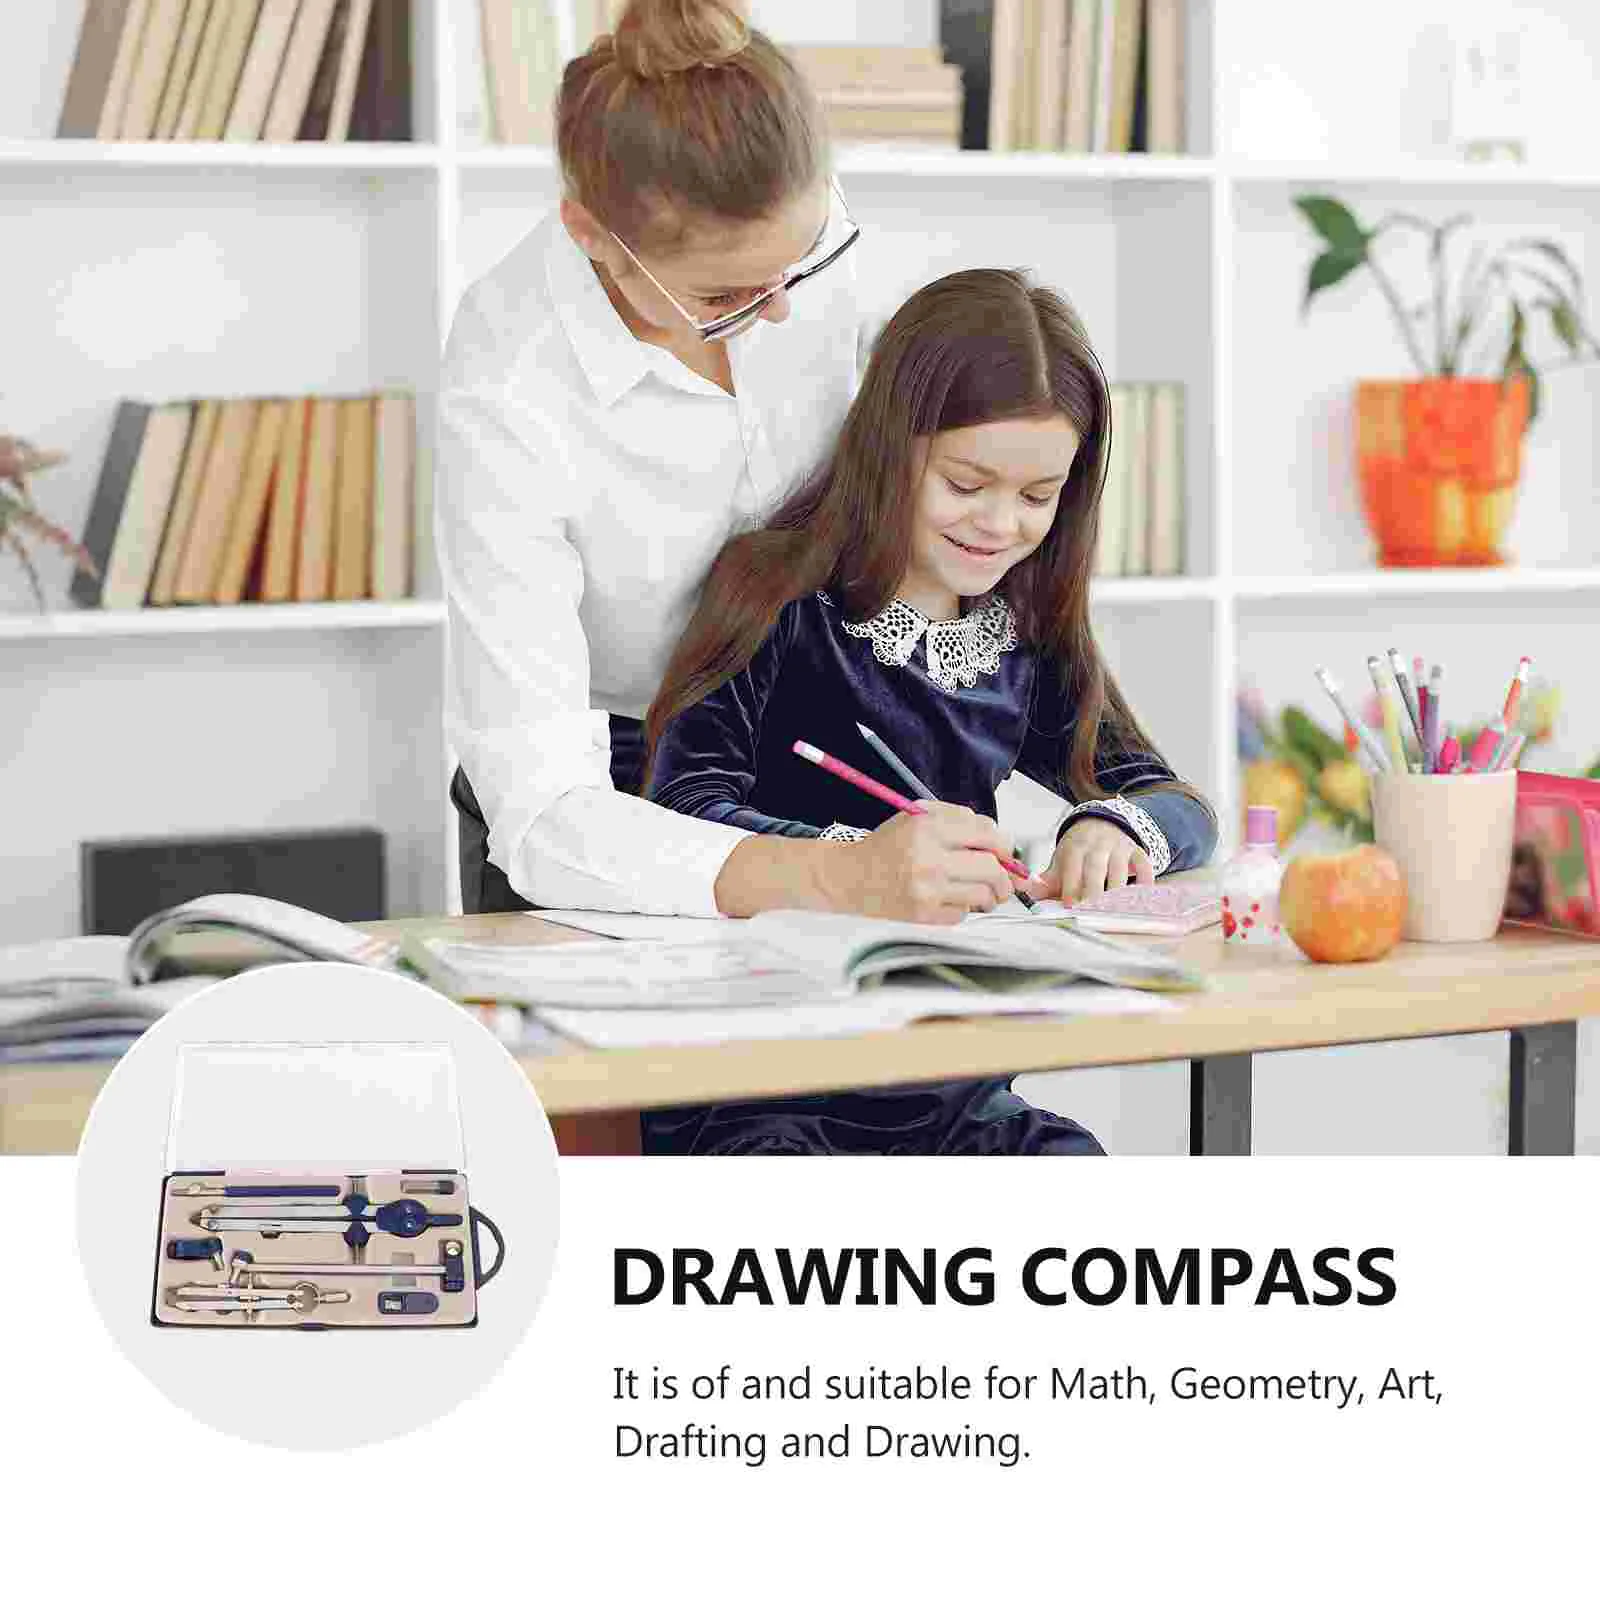 Professional Compass Set Precision Drafting Drawing for Students Office Worker